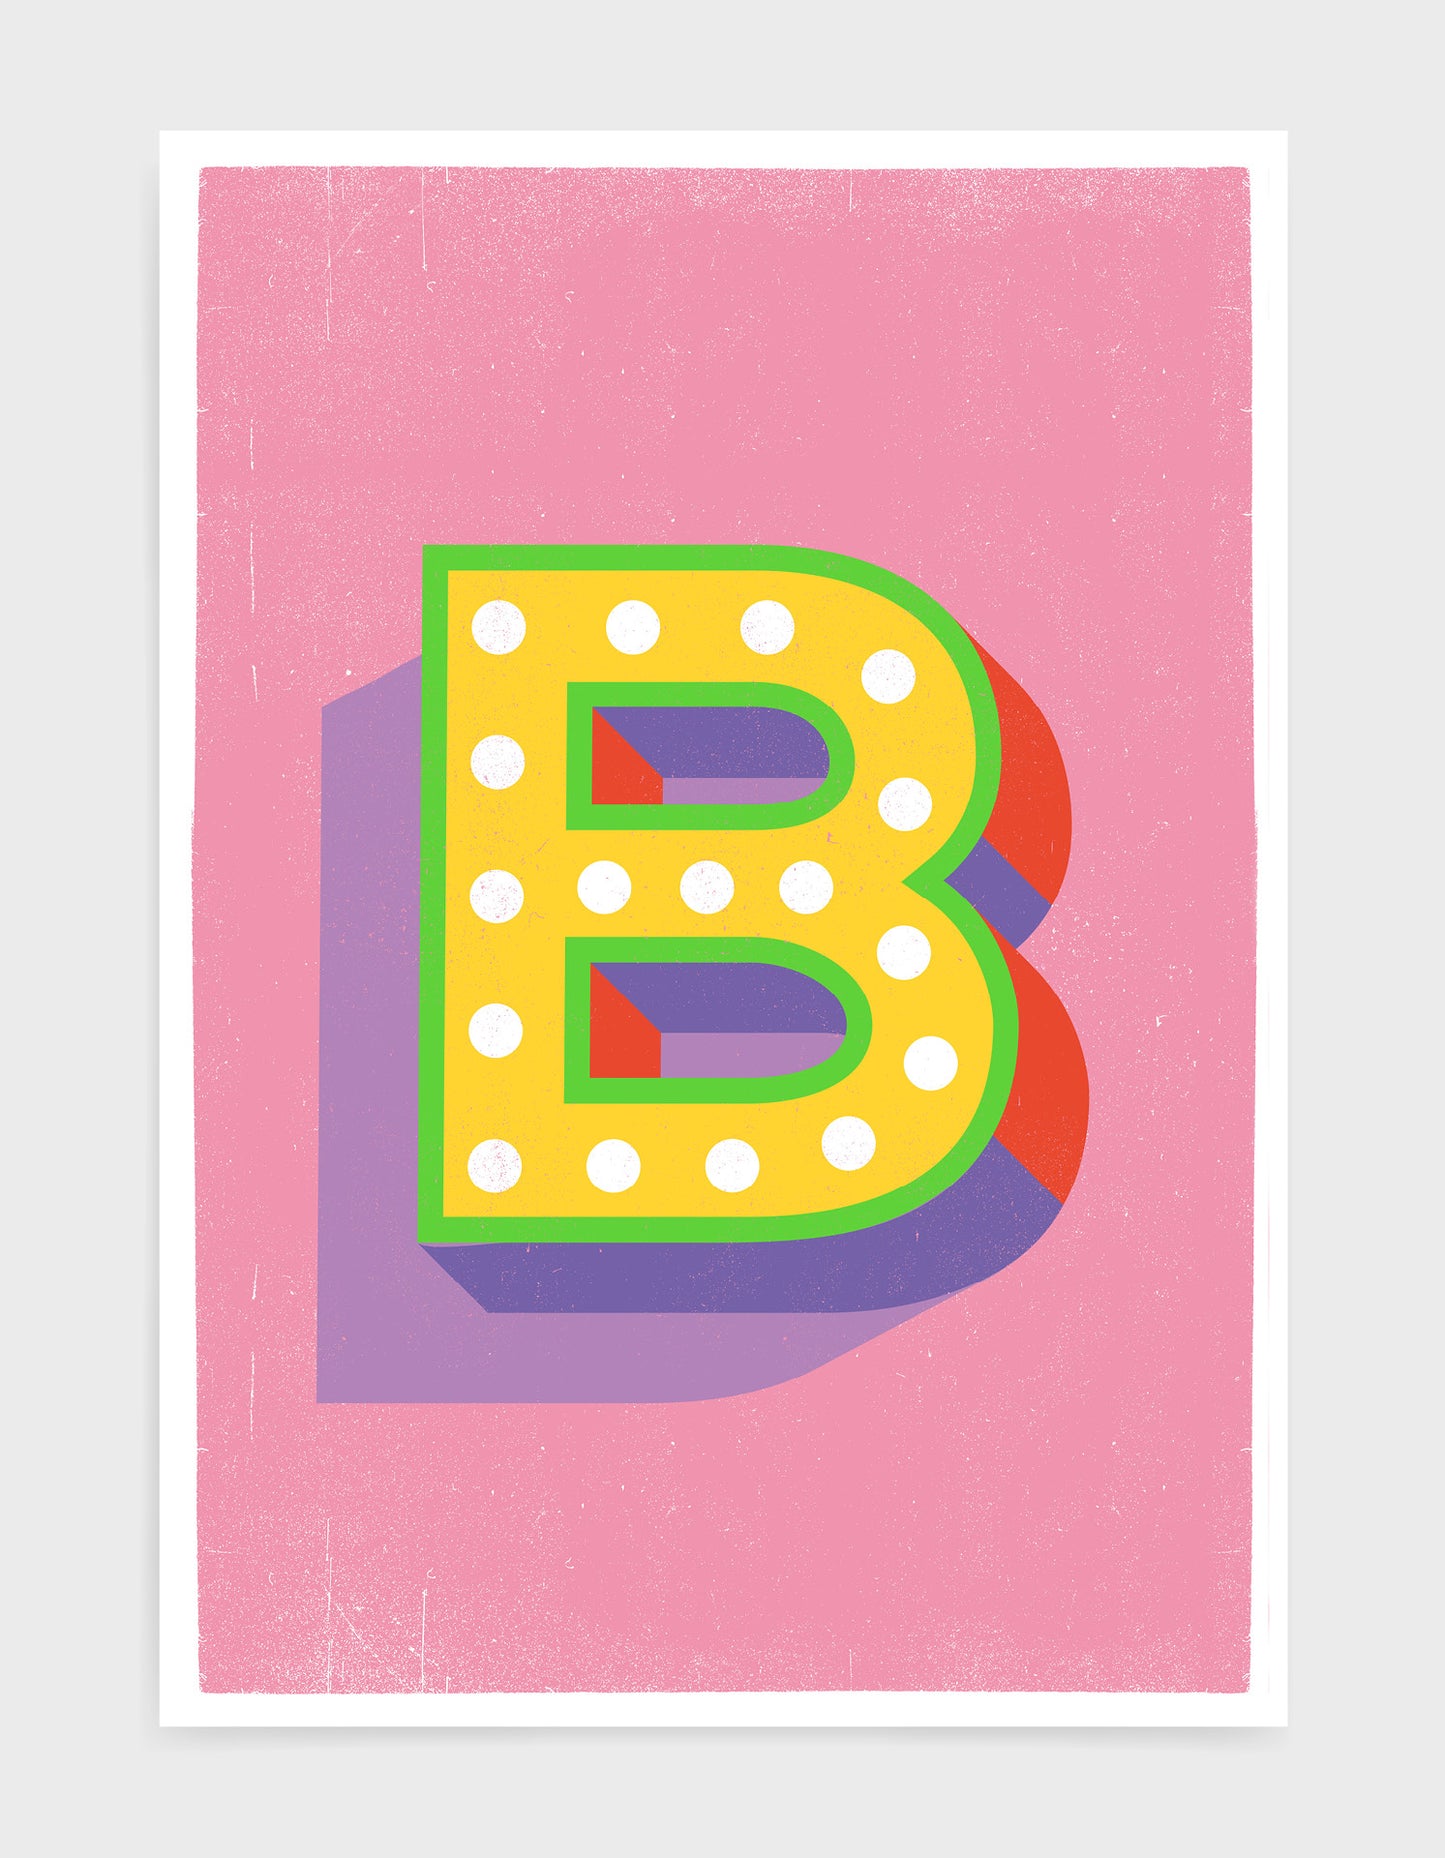 Alphabet print - lights on font in yellow against a pink background - letter b